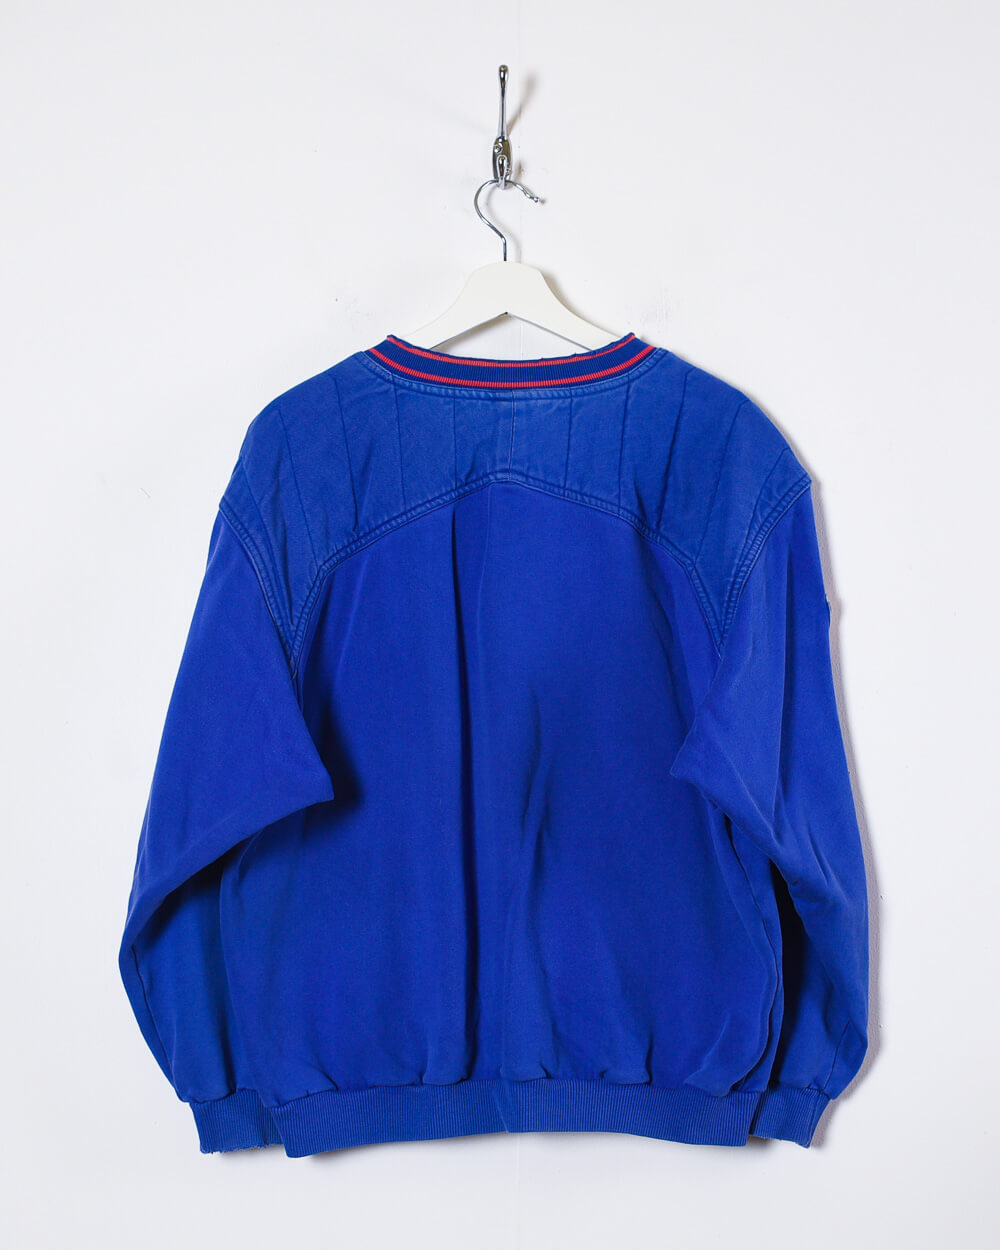 Blue Nike Premier 90s PSG Pullover Drill Warm-up Jacket - Small